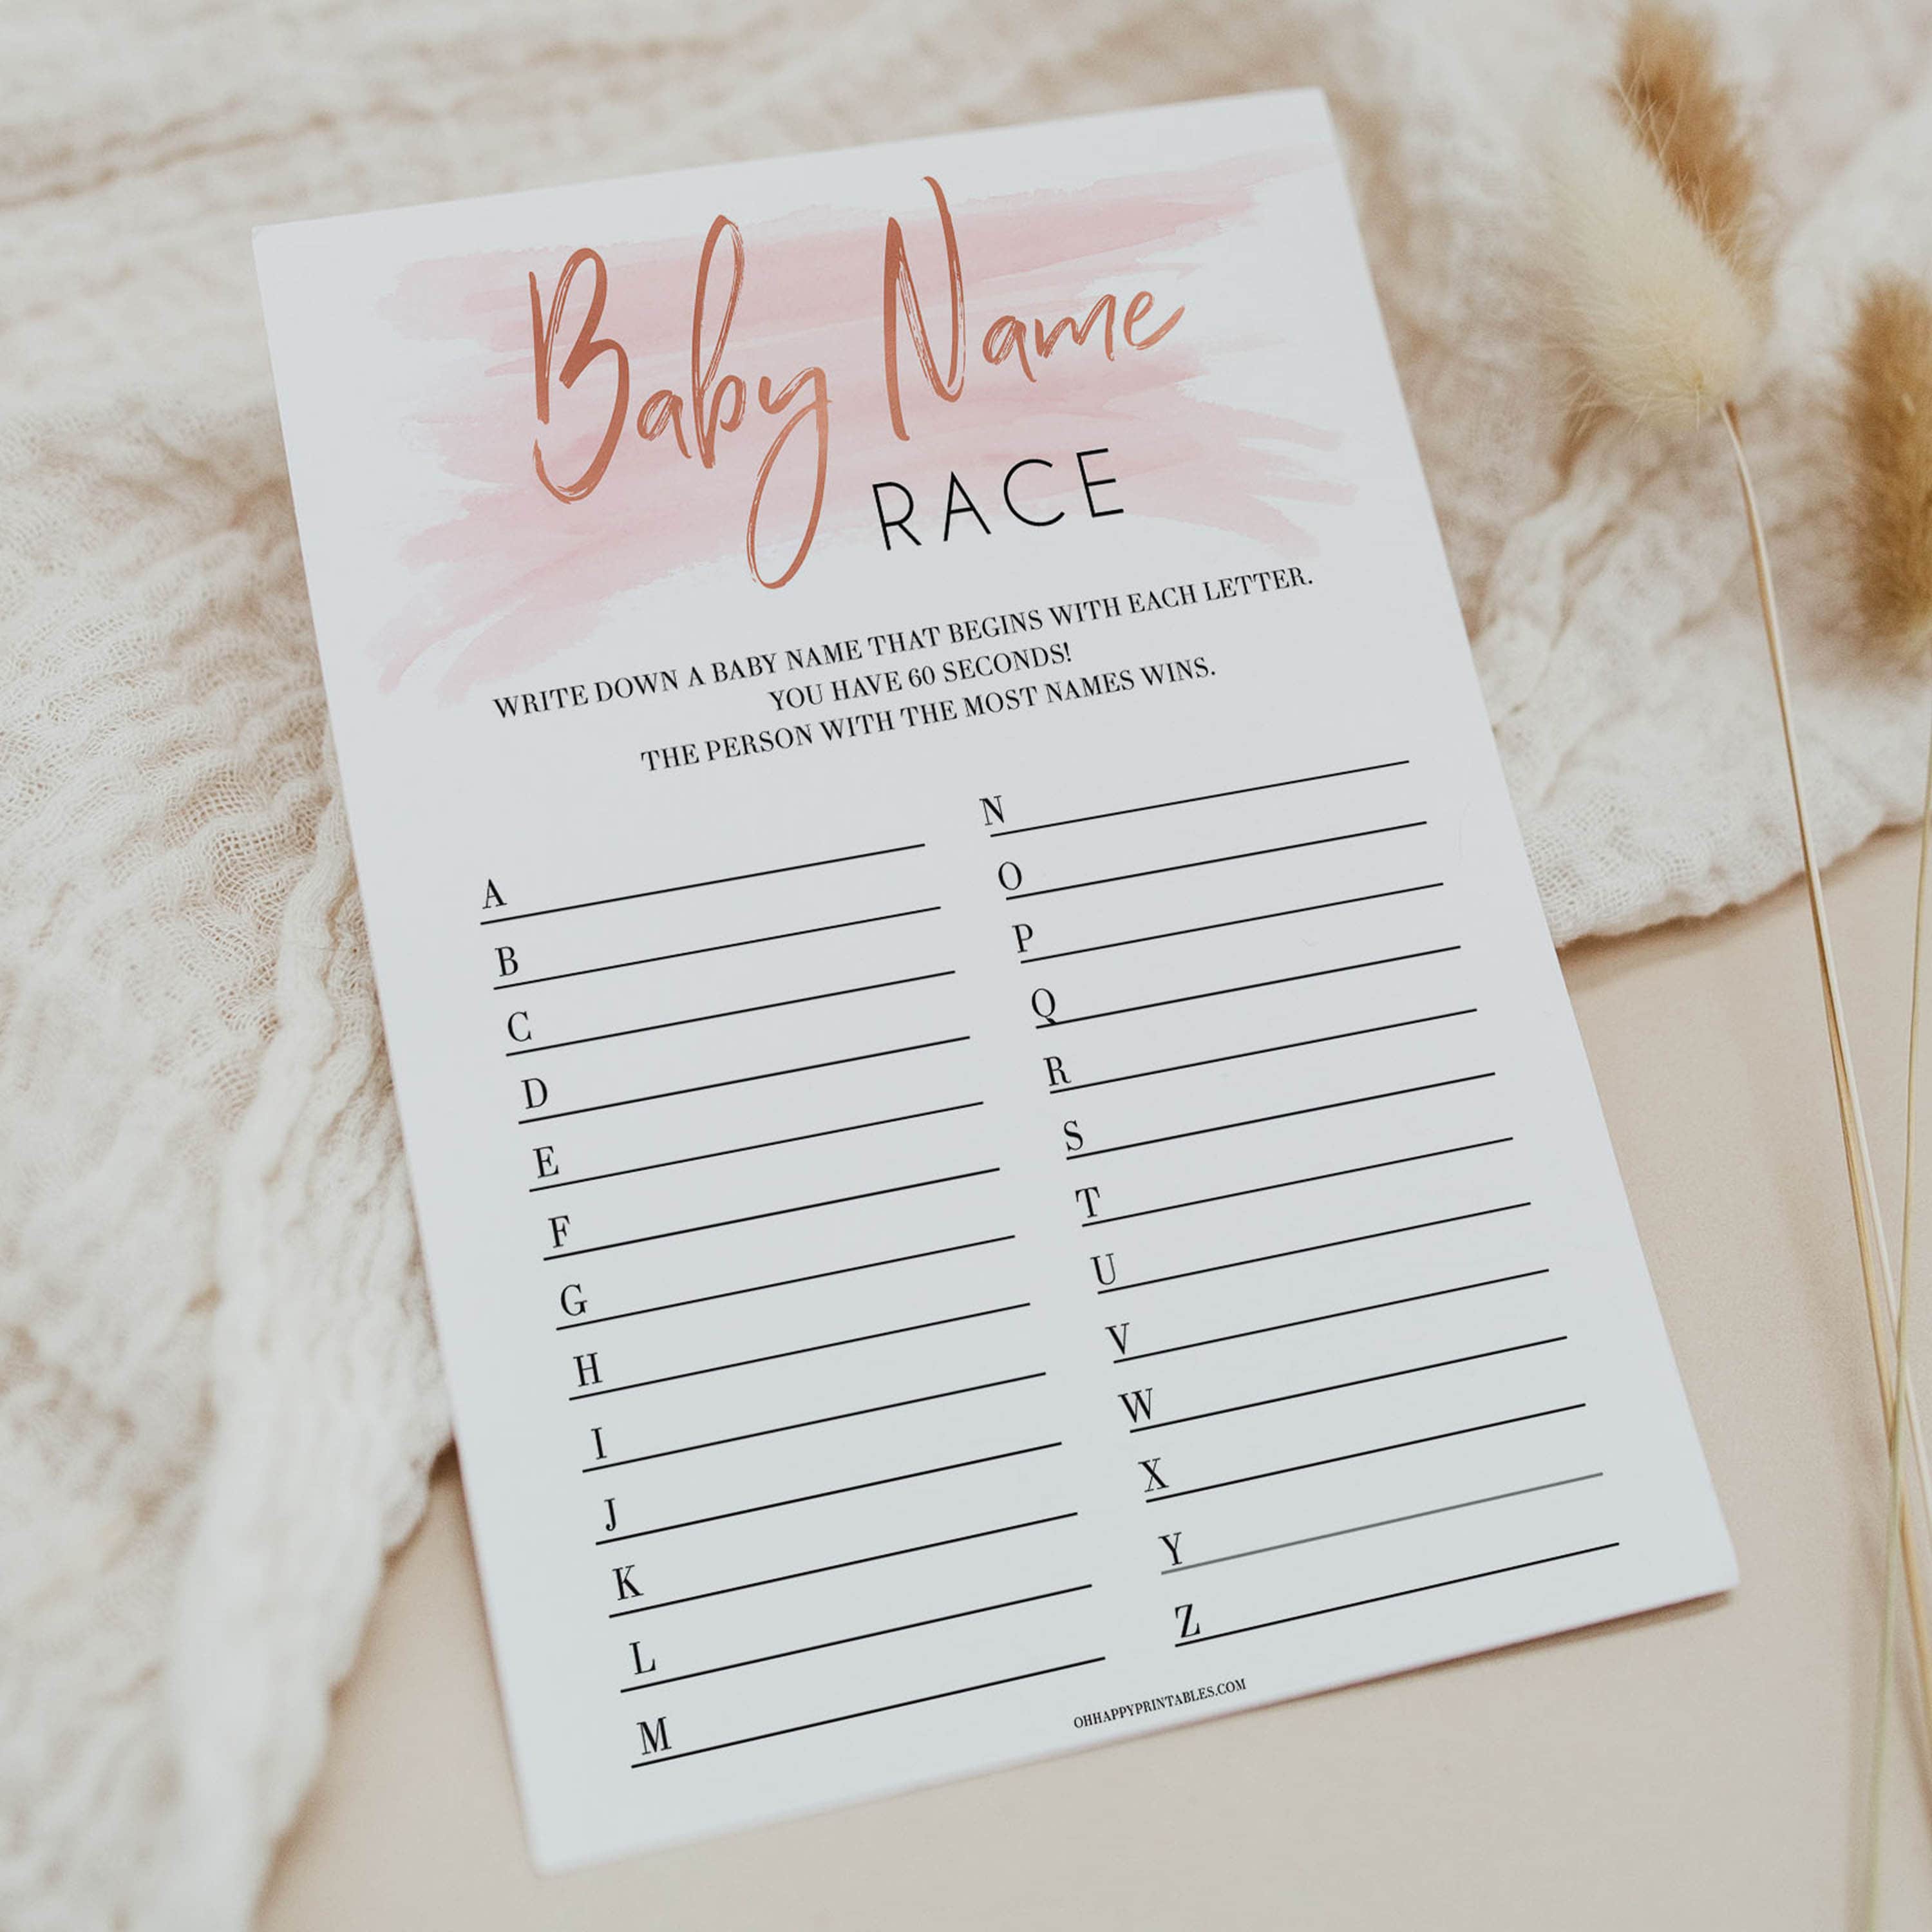 Baby name race pink game, printable baby shower games, baby shower games, fun baby shower games, popular baby shower games